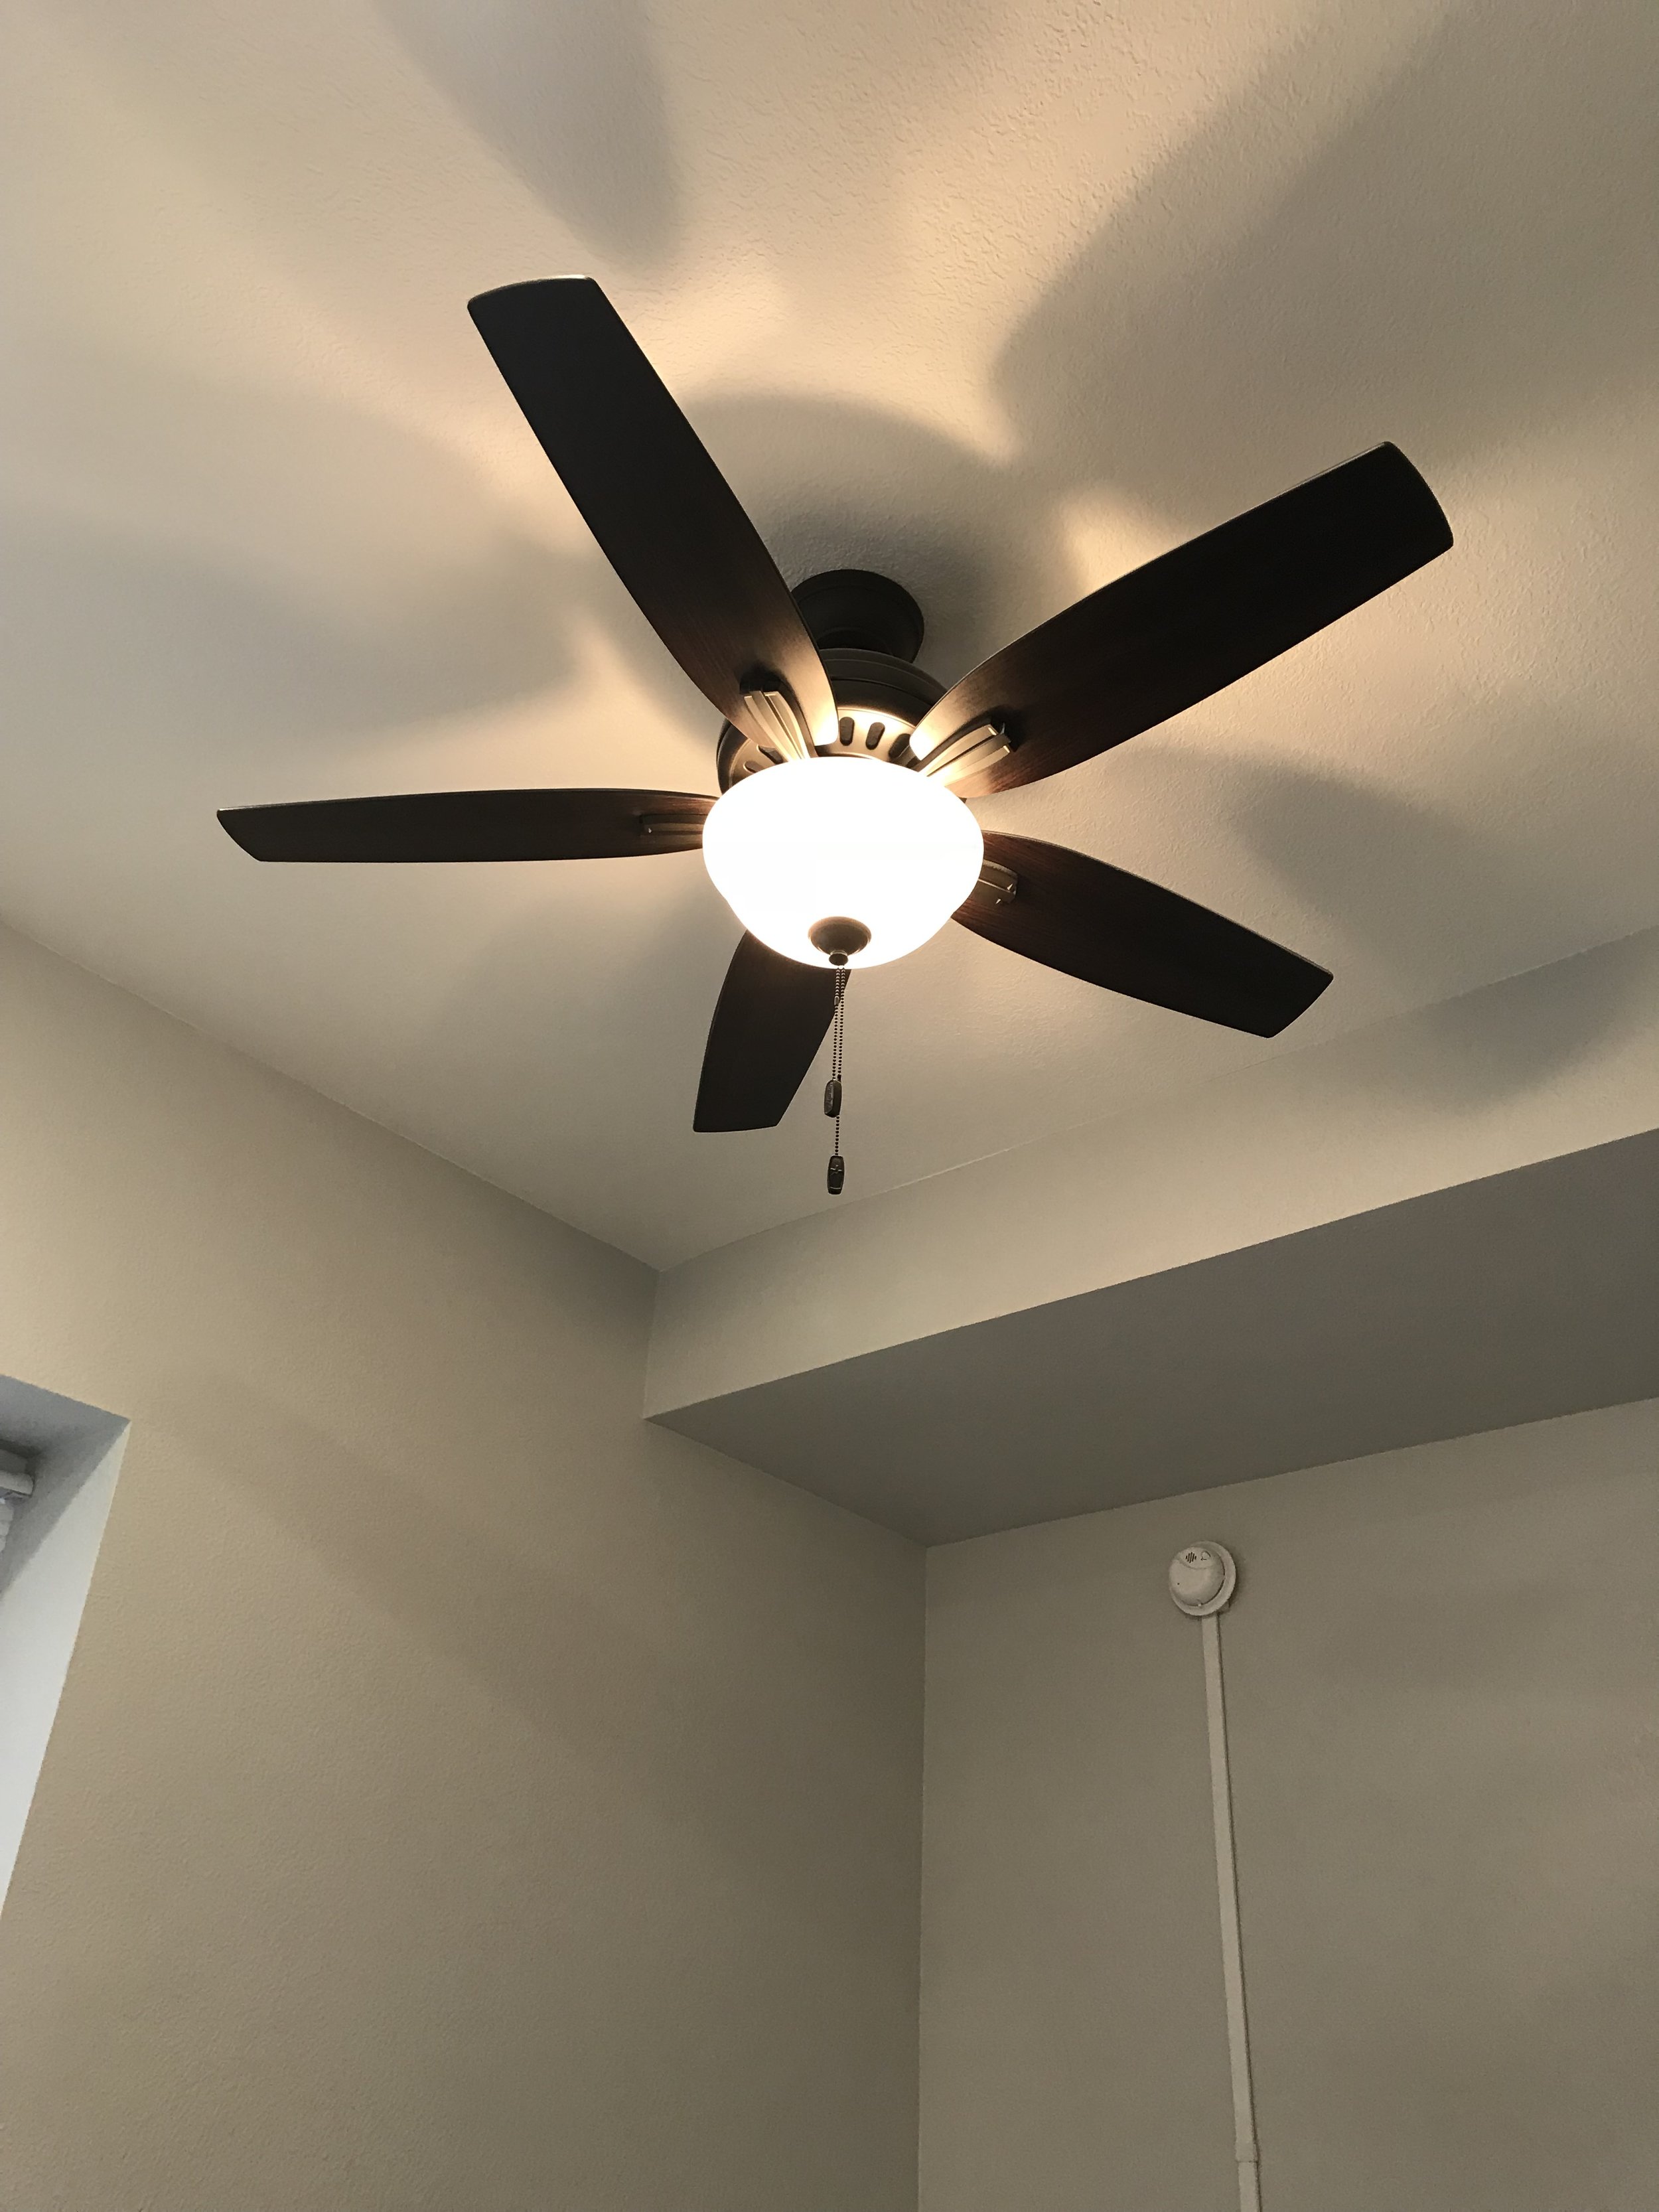 Ceiling Fans in LR and Bedroom